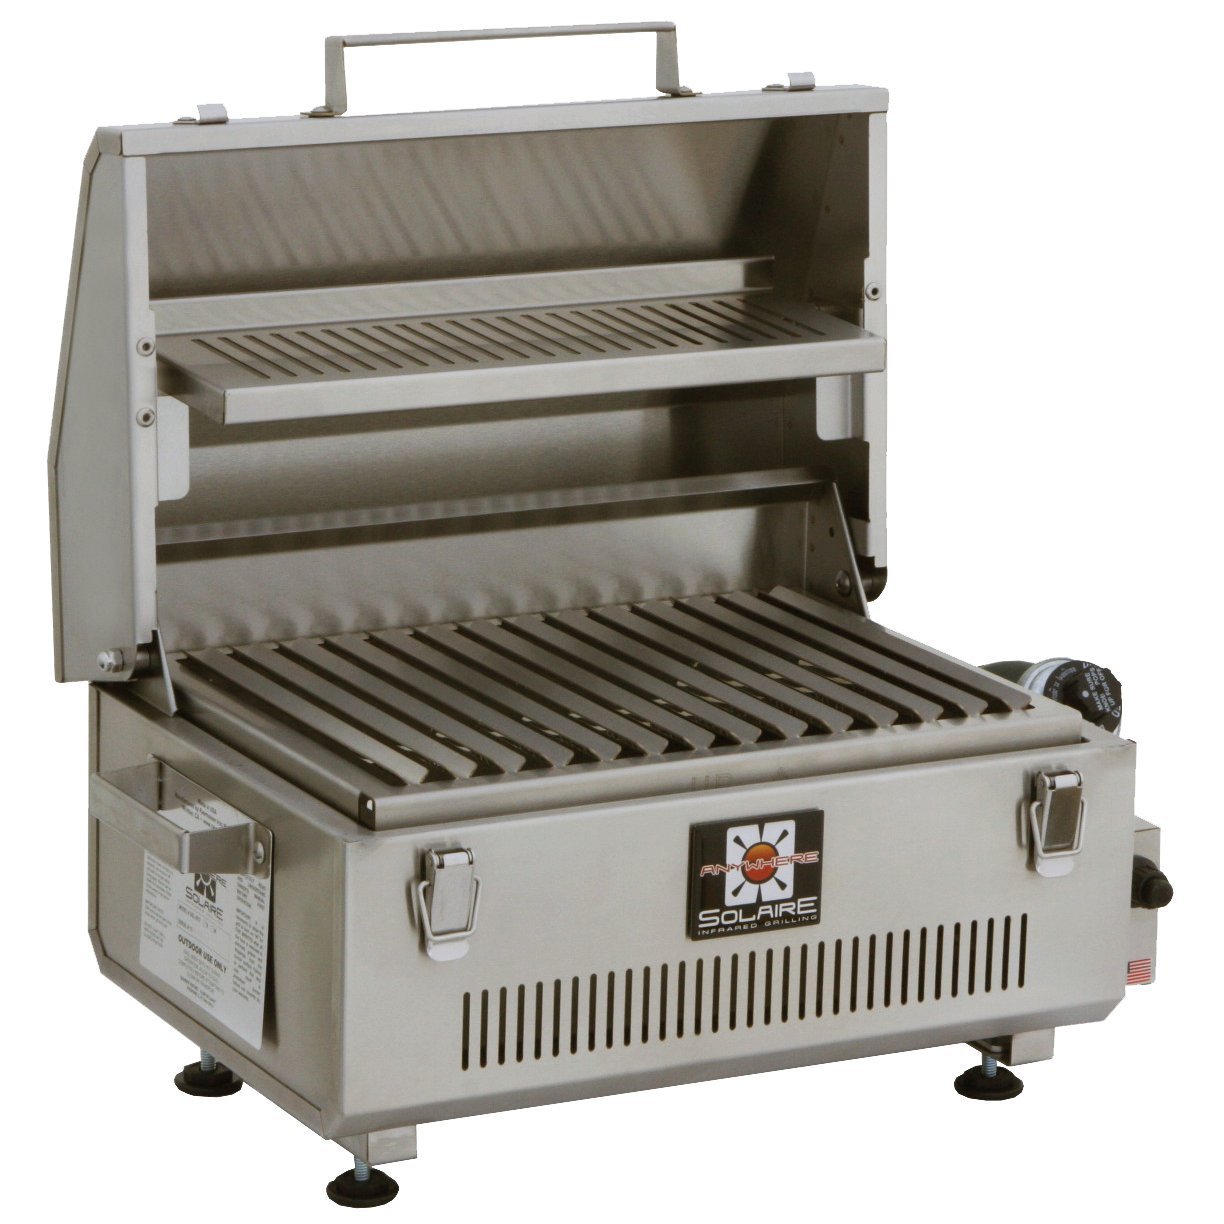 The Best Small Propane Grill & Best Portable Gas Grill For RV